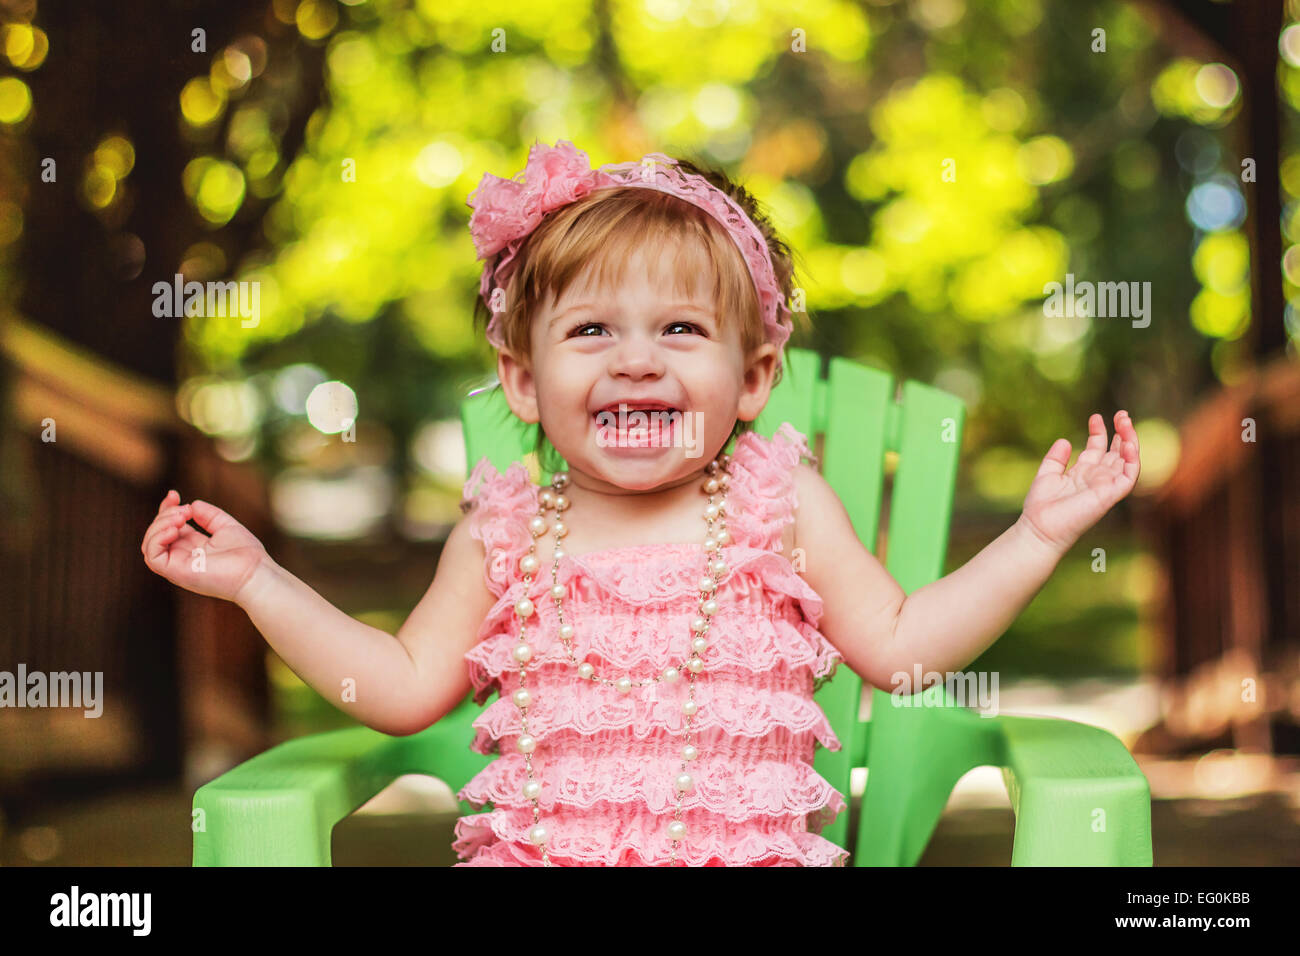 Happy girl in a party dress sitting in garden chair laughing Stock Photo